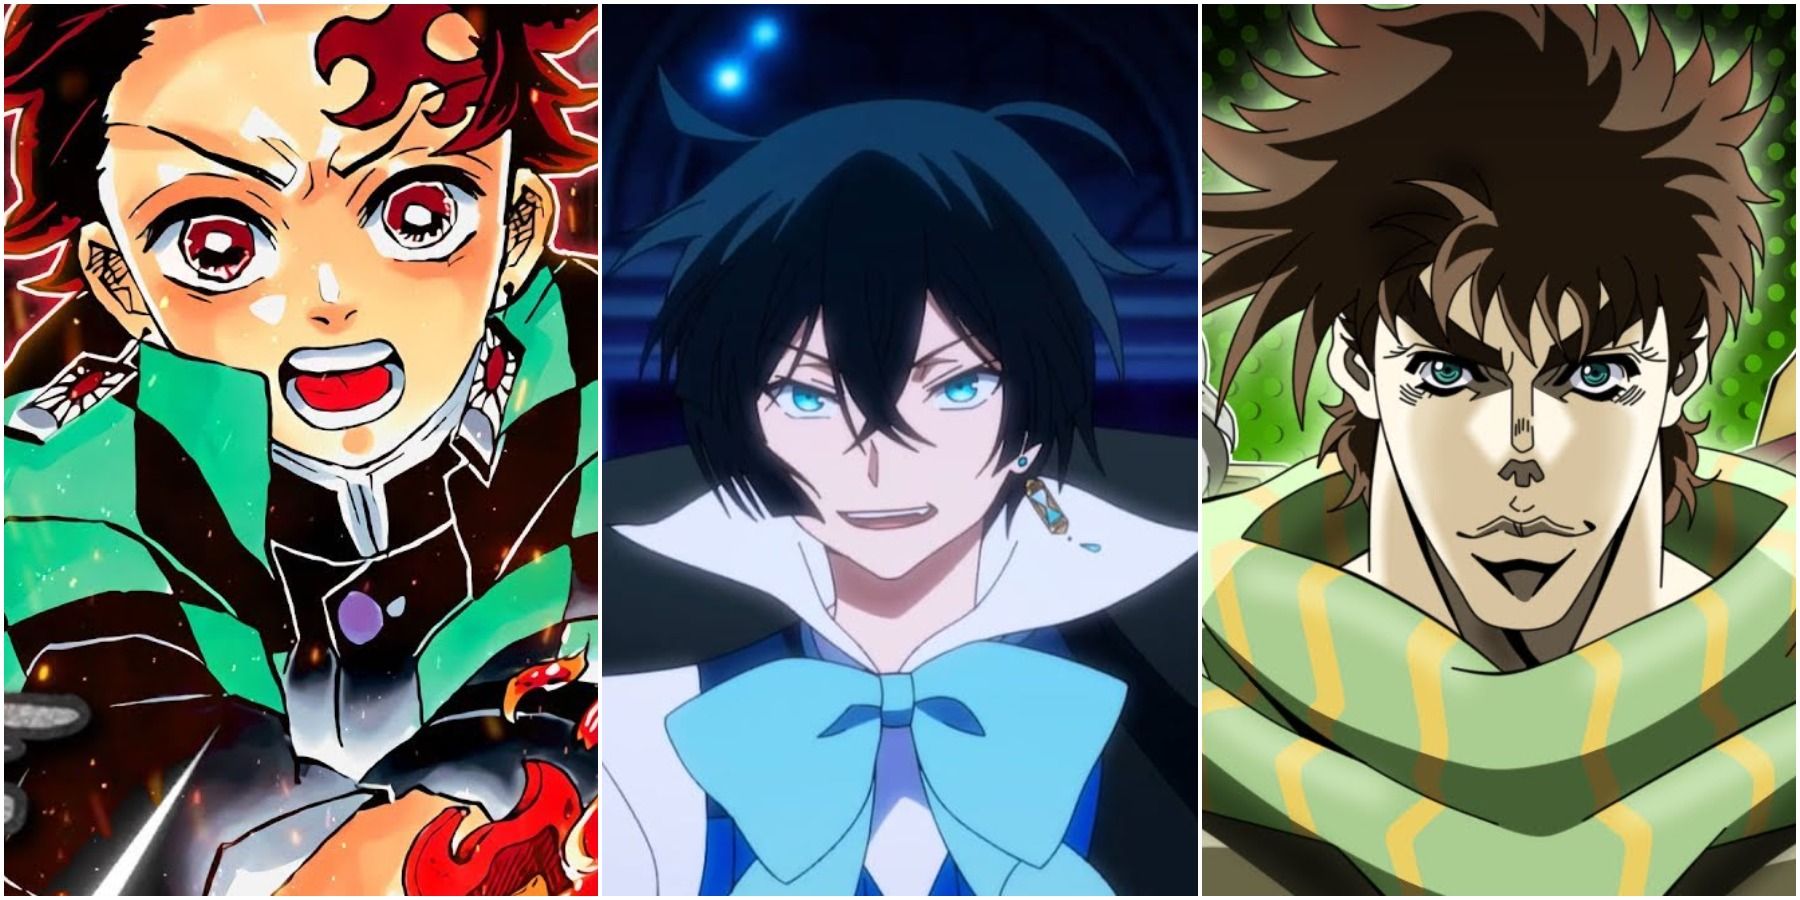 Supernatural anime to watch if you love The Case Study of the Vanitas